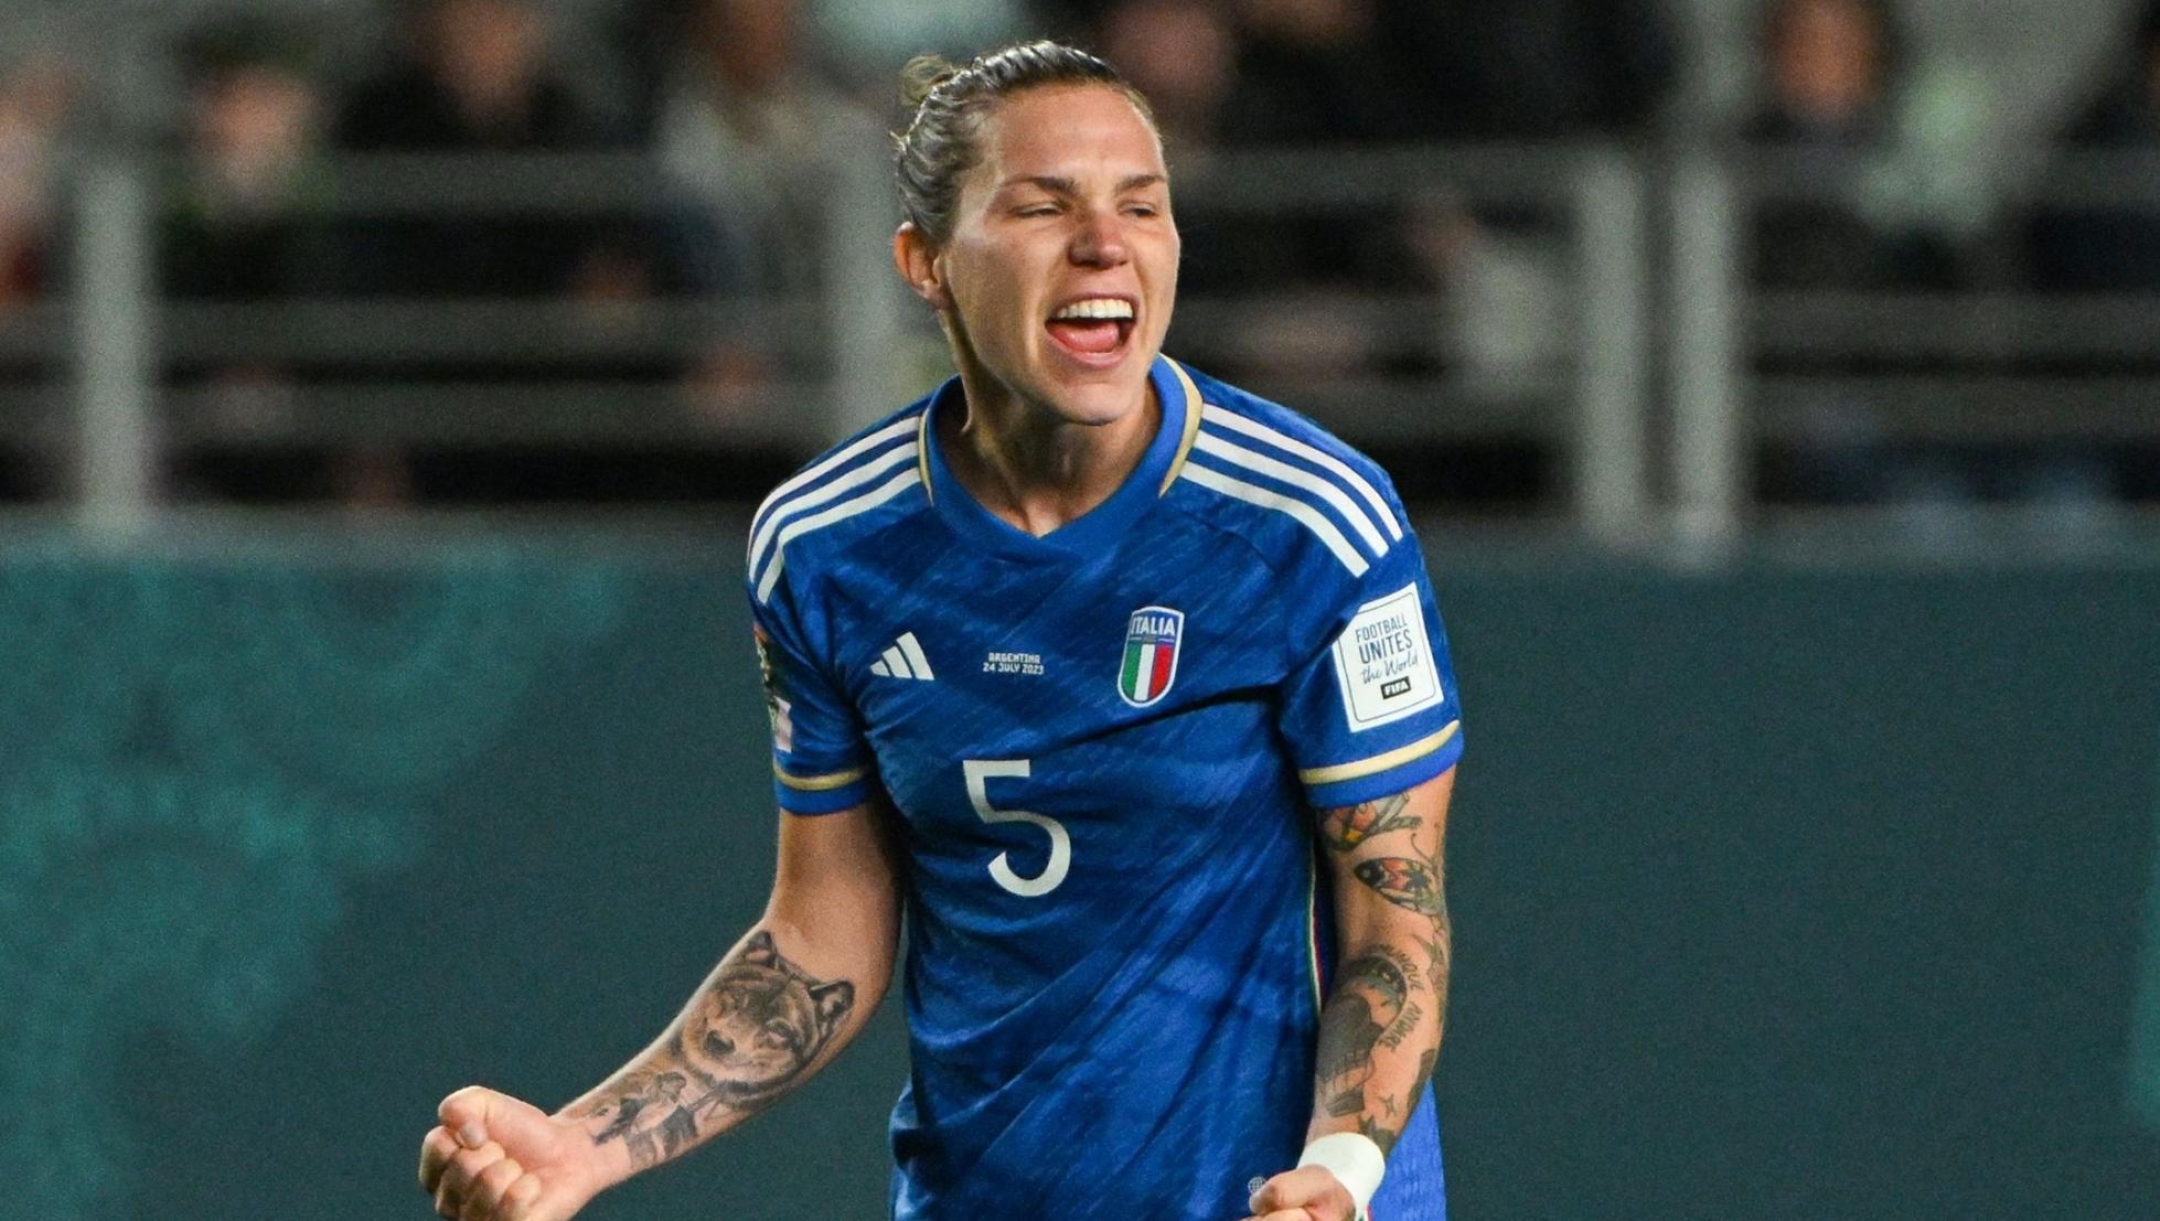 Italy's defender #05 Elena Linari celebrates her team's victory after the final whistle of the Australia and New Zealand 2023 Women's World Cup Group G football match between Italy and Argentina at Eden Park in Auckland on July 24, 2023. (Photo by Saeed KHAN / AFP)